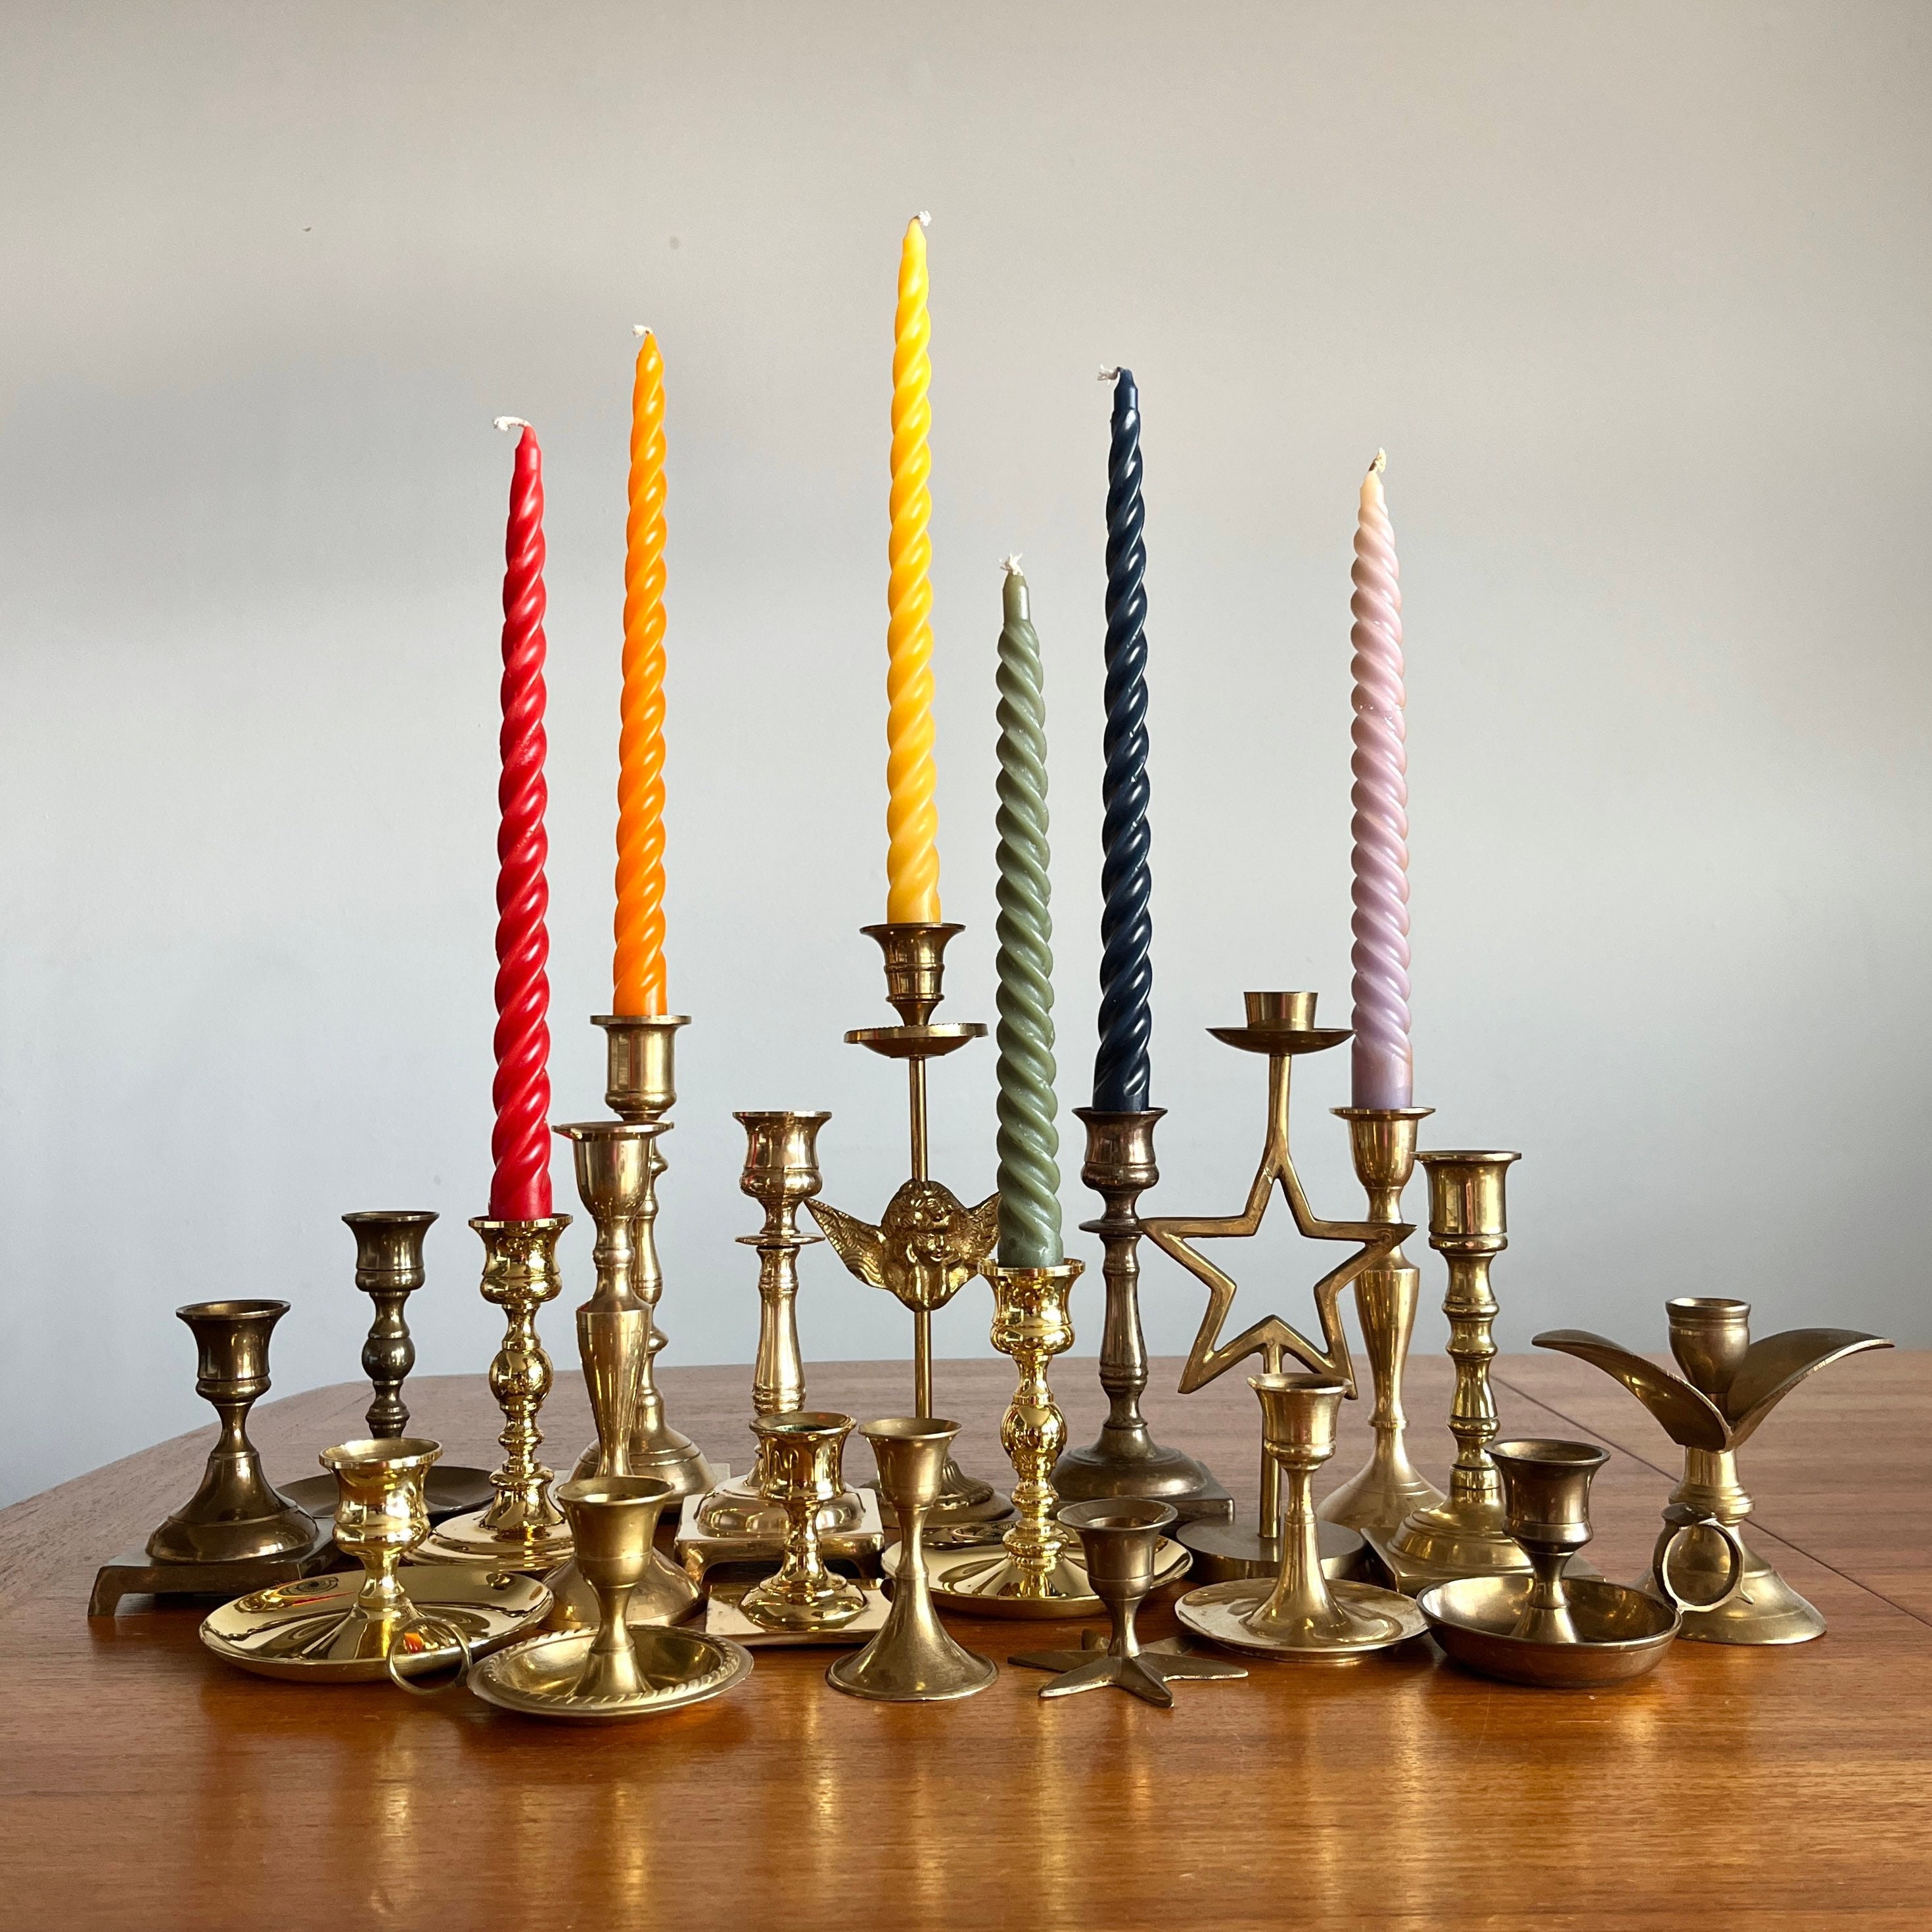 Bohemian & Eclectic Candles & Holders - Etsy